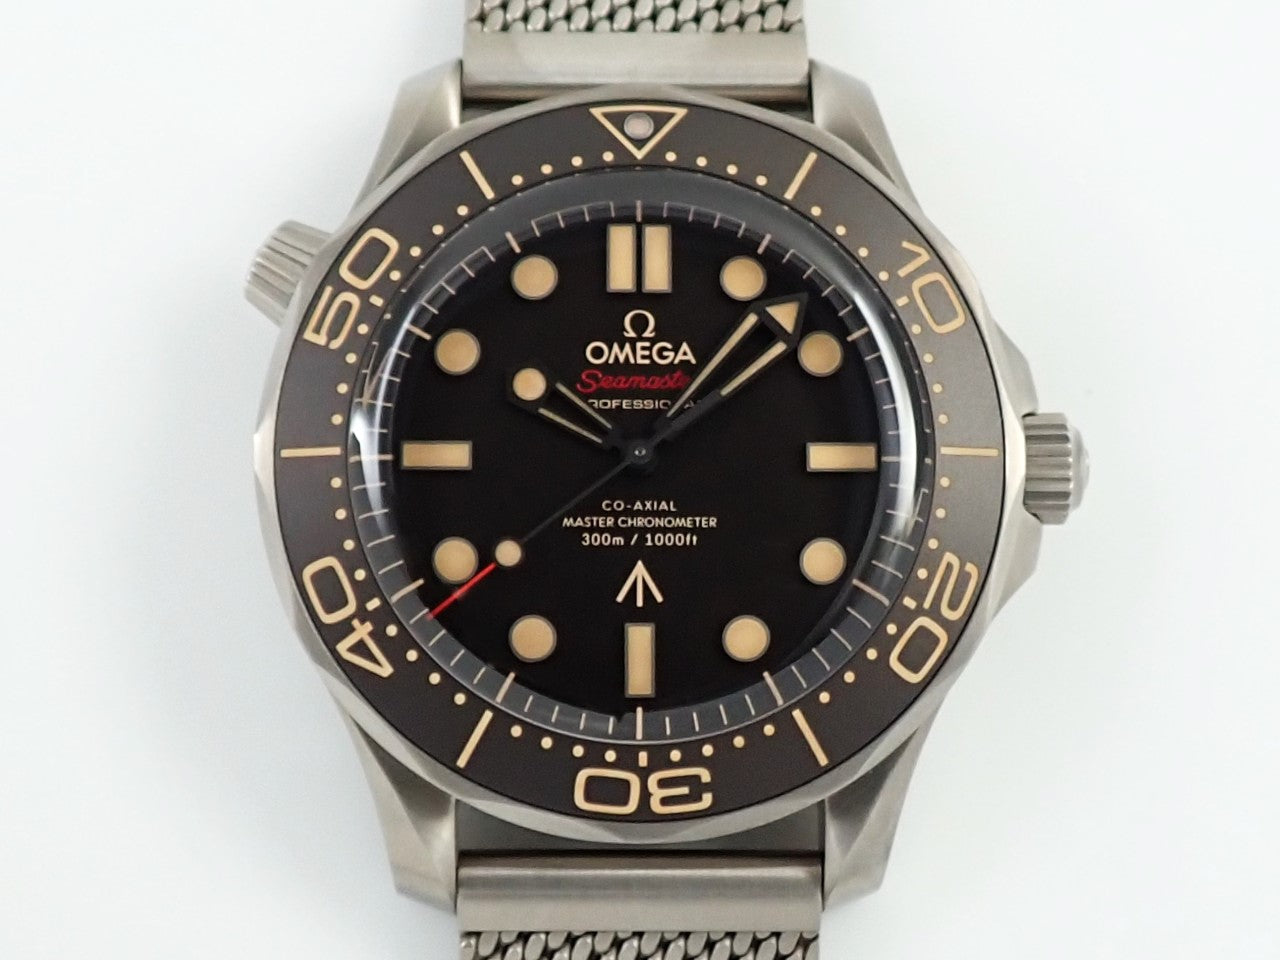 Omega Seamaster Diver 300M Co-Axial Master Chronometer 42MM &lt;Warranty, Box, etc.&gt;